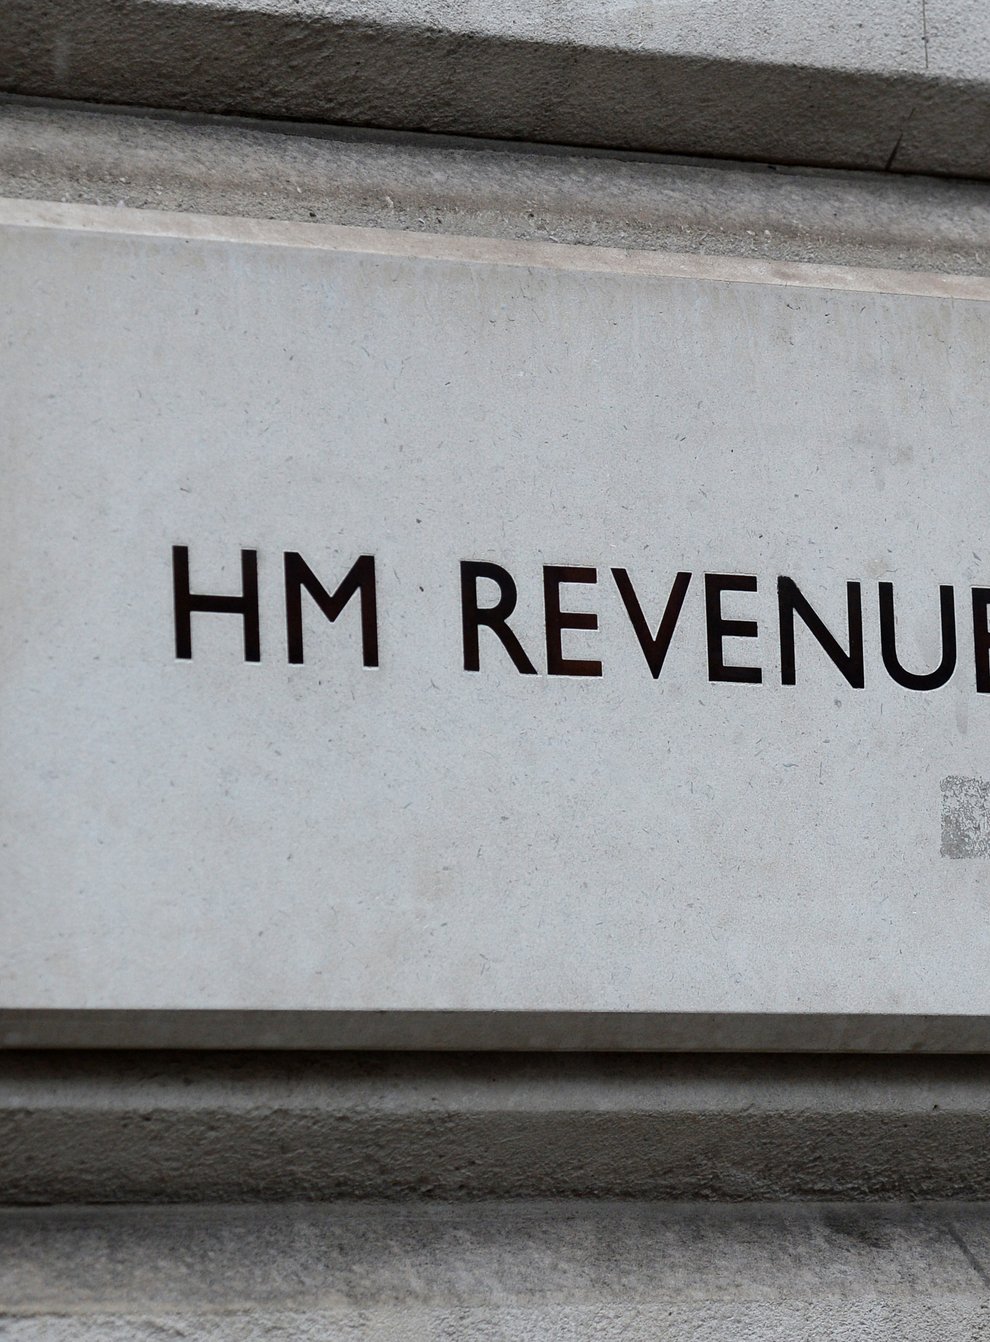 MPs said that HMRC should secure more resources to clamp down on missing tax. (Kirsty O’Connor/PA)